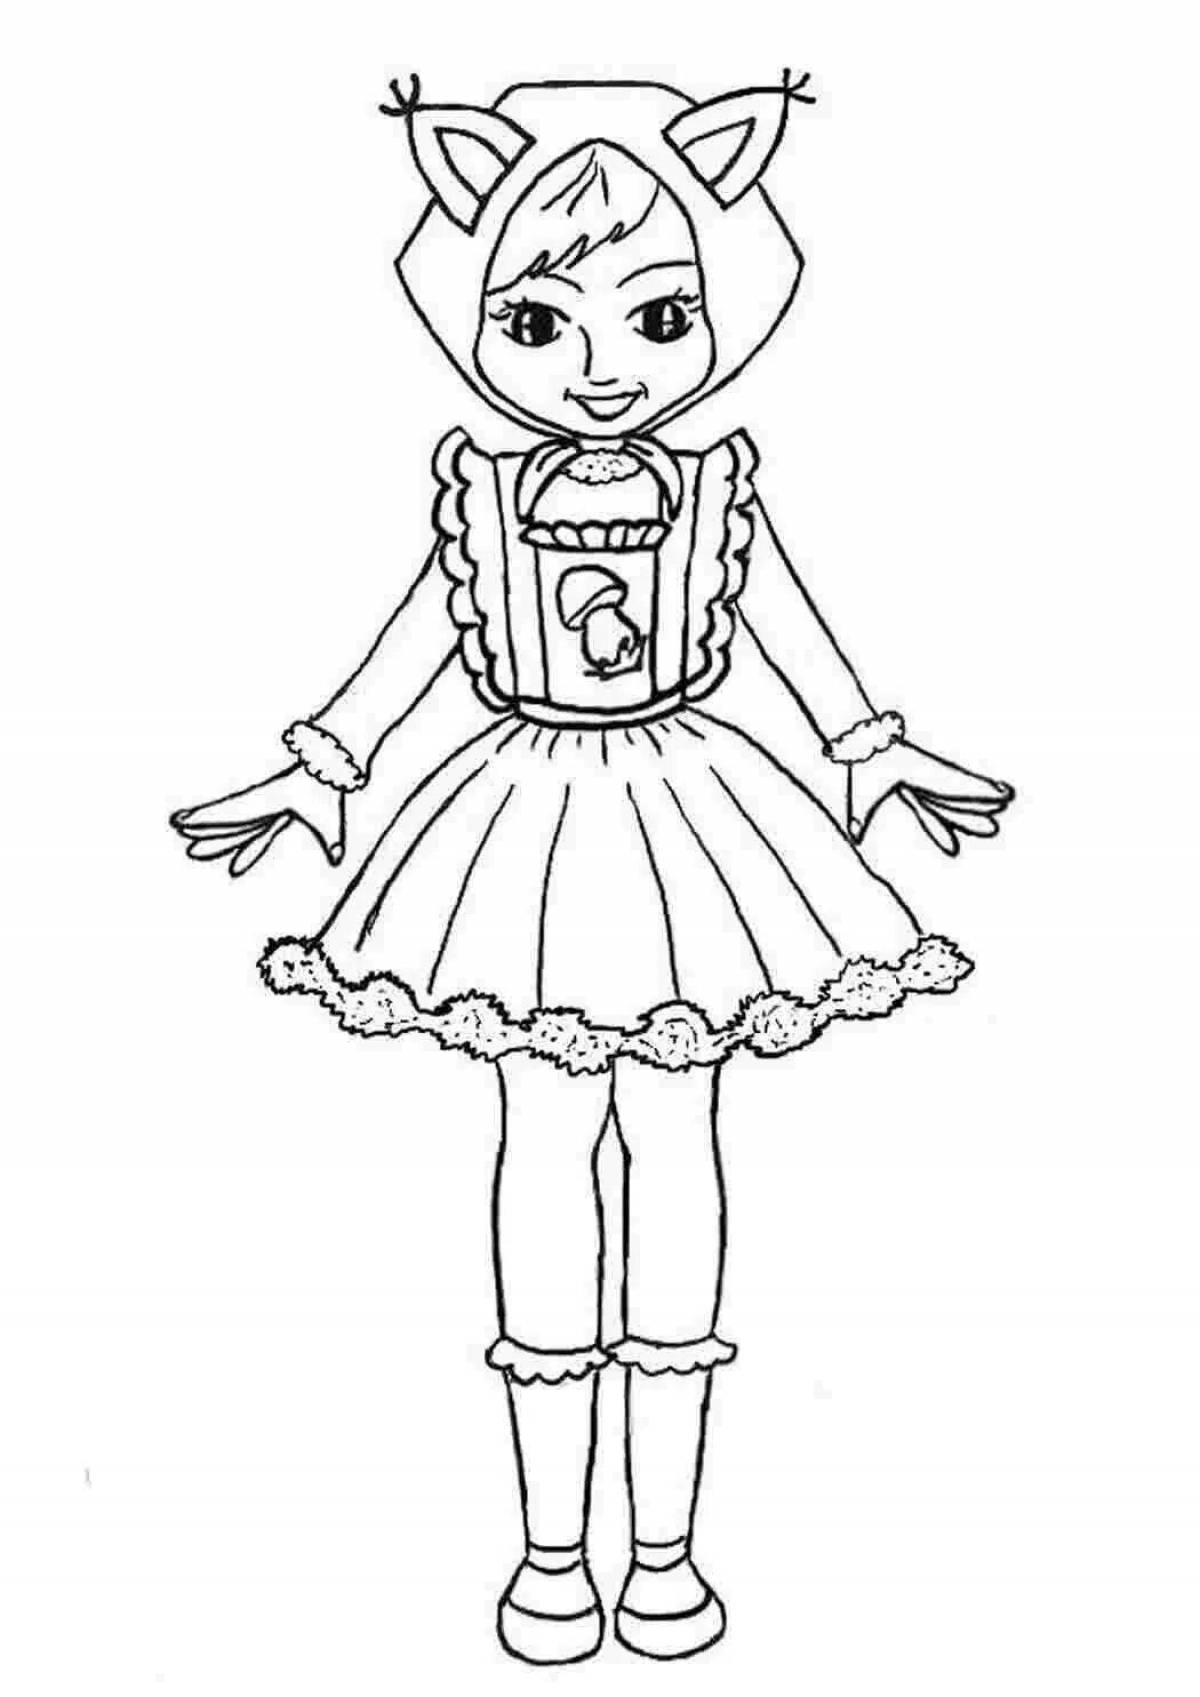 Charming carnival costume coloring page